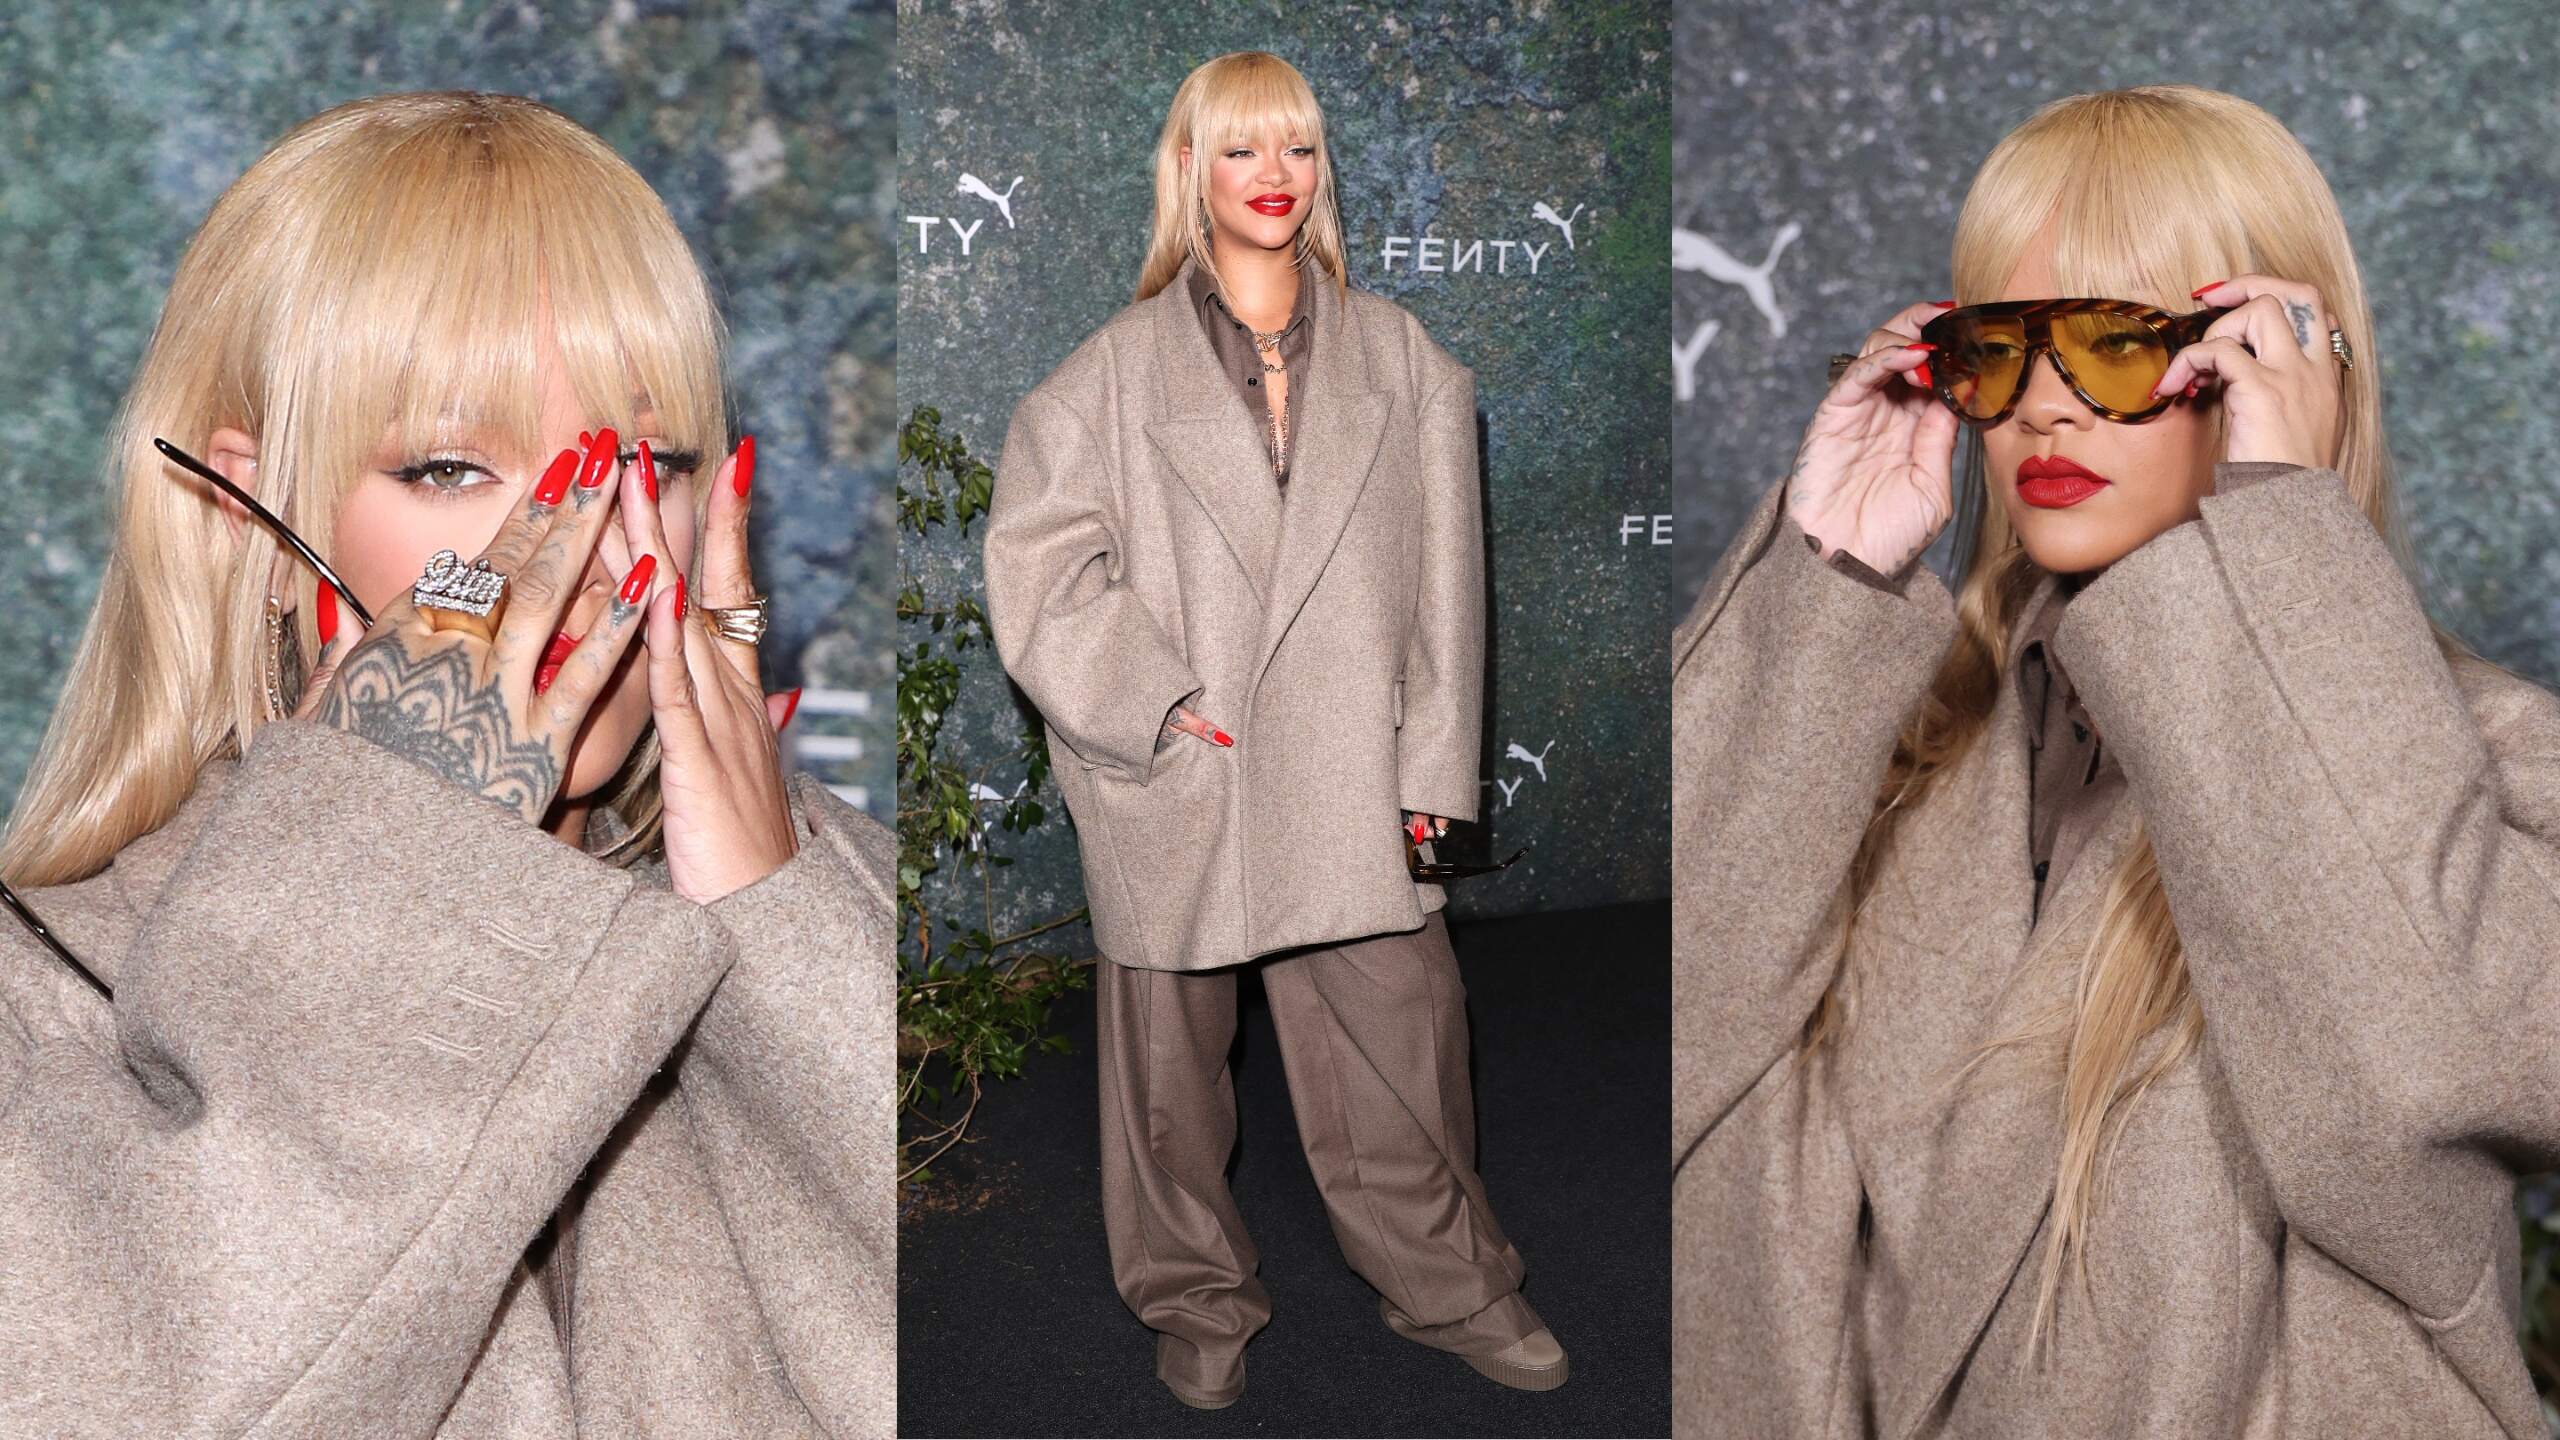 Singer Rihanna poses in a beige outfit on the red carpet at the FENTY x PUMA Creeper Phatty Launch Party